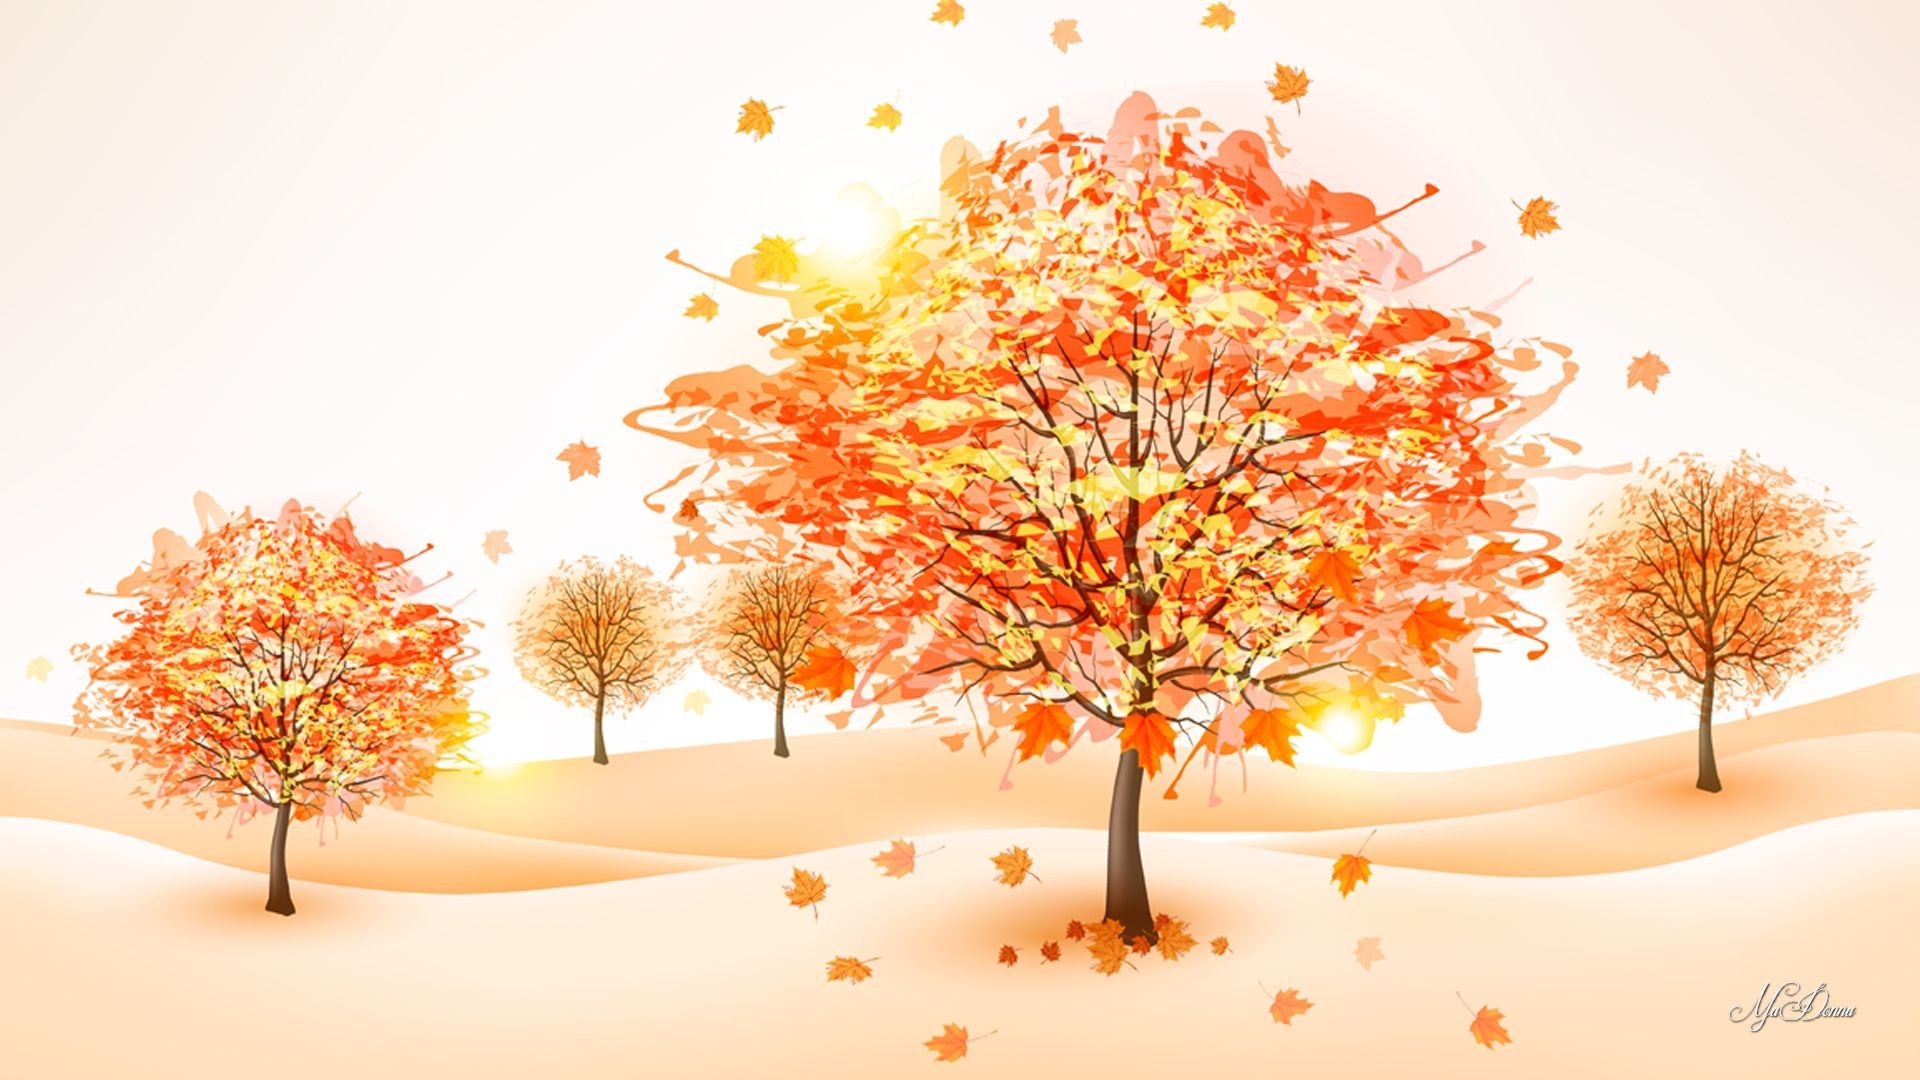 Cute Fall Background Wallpaper HD With high-resolution 1920X1080 pixel. You can use this wallpaper for your Windows and Mac OS computers as well as your Android and iPhone smartphones